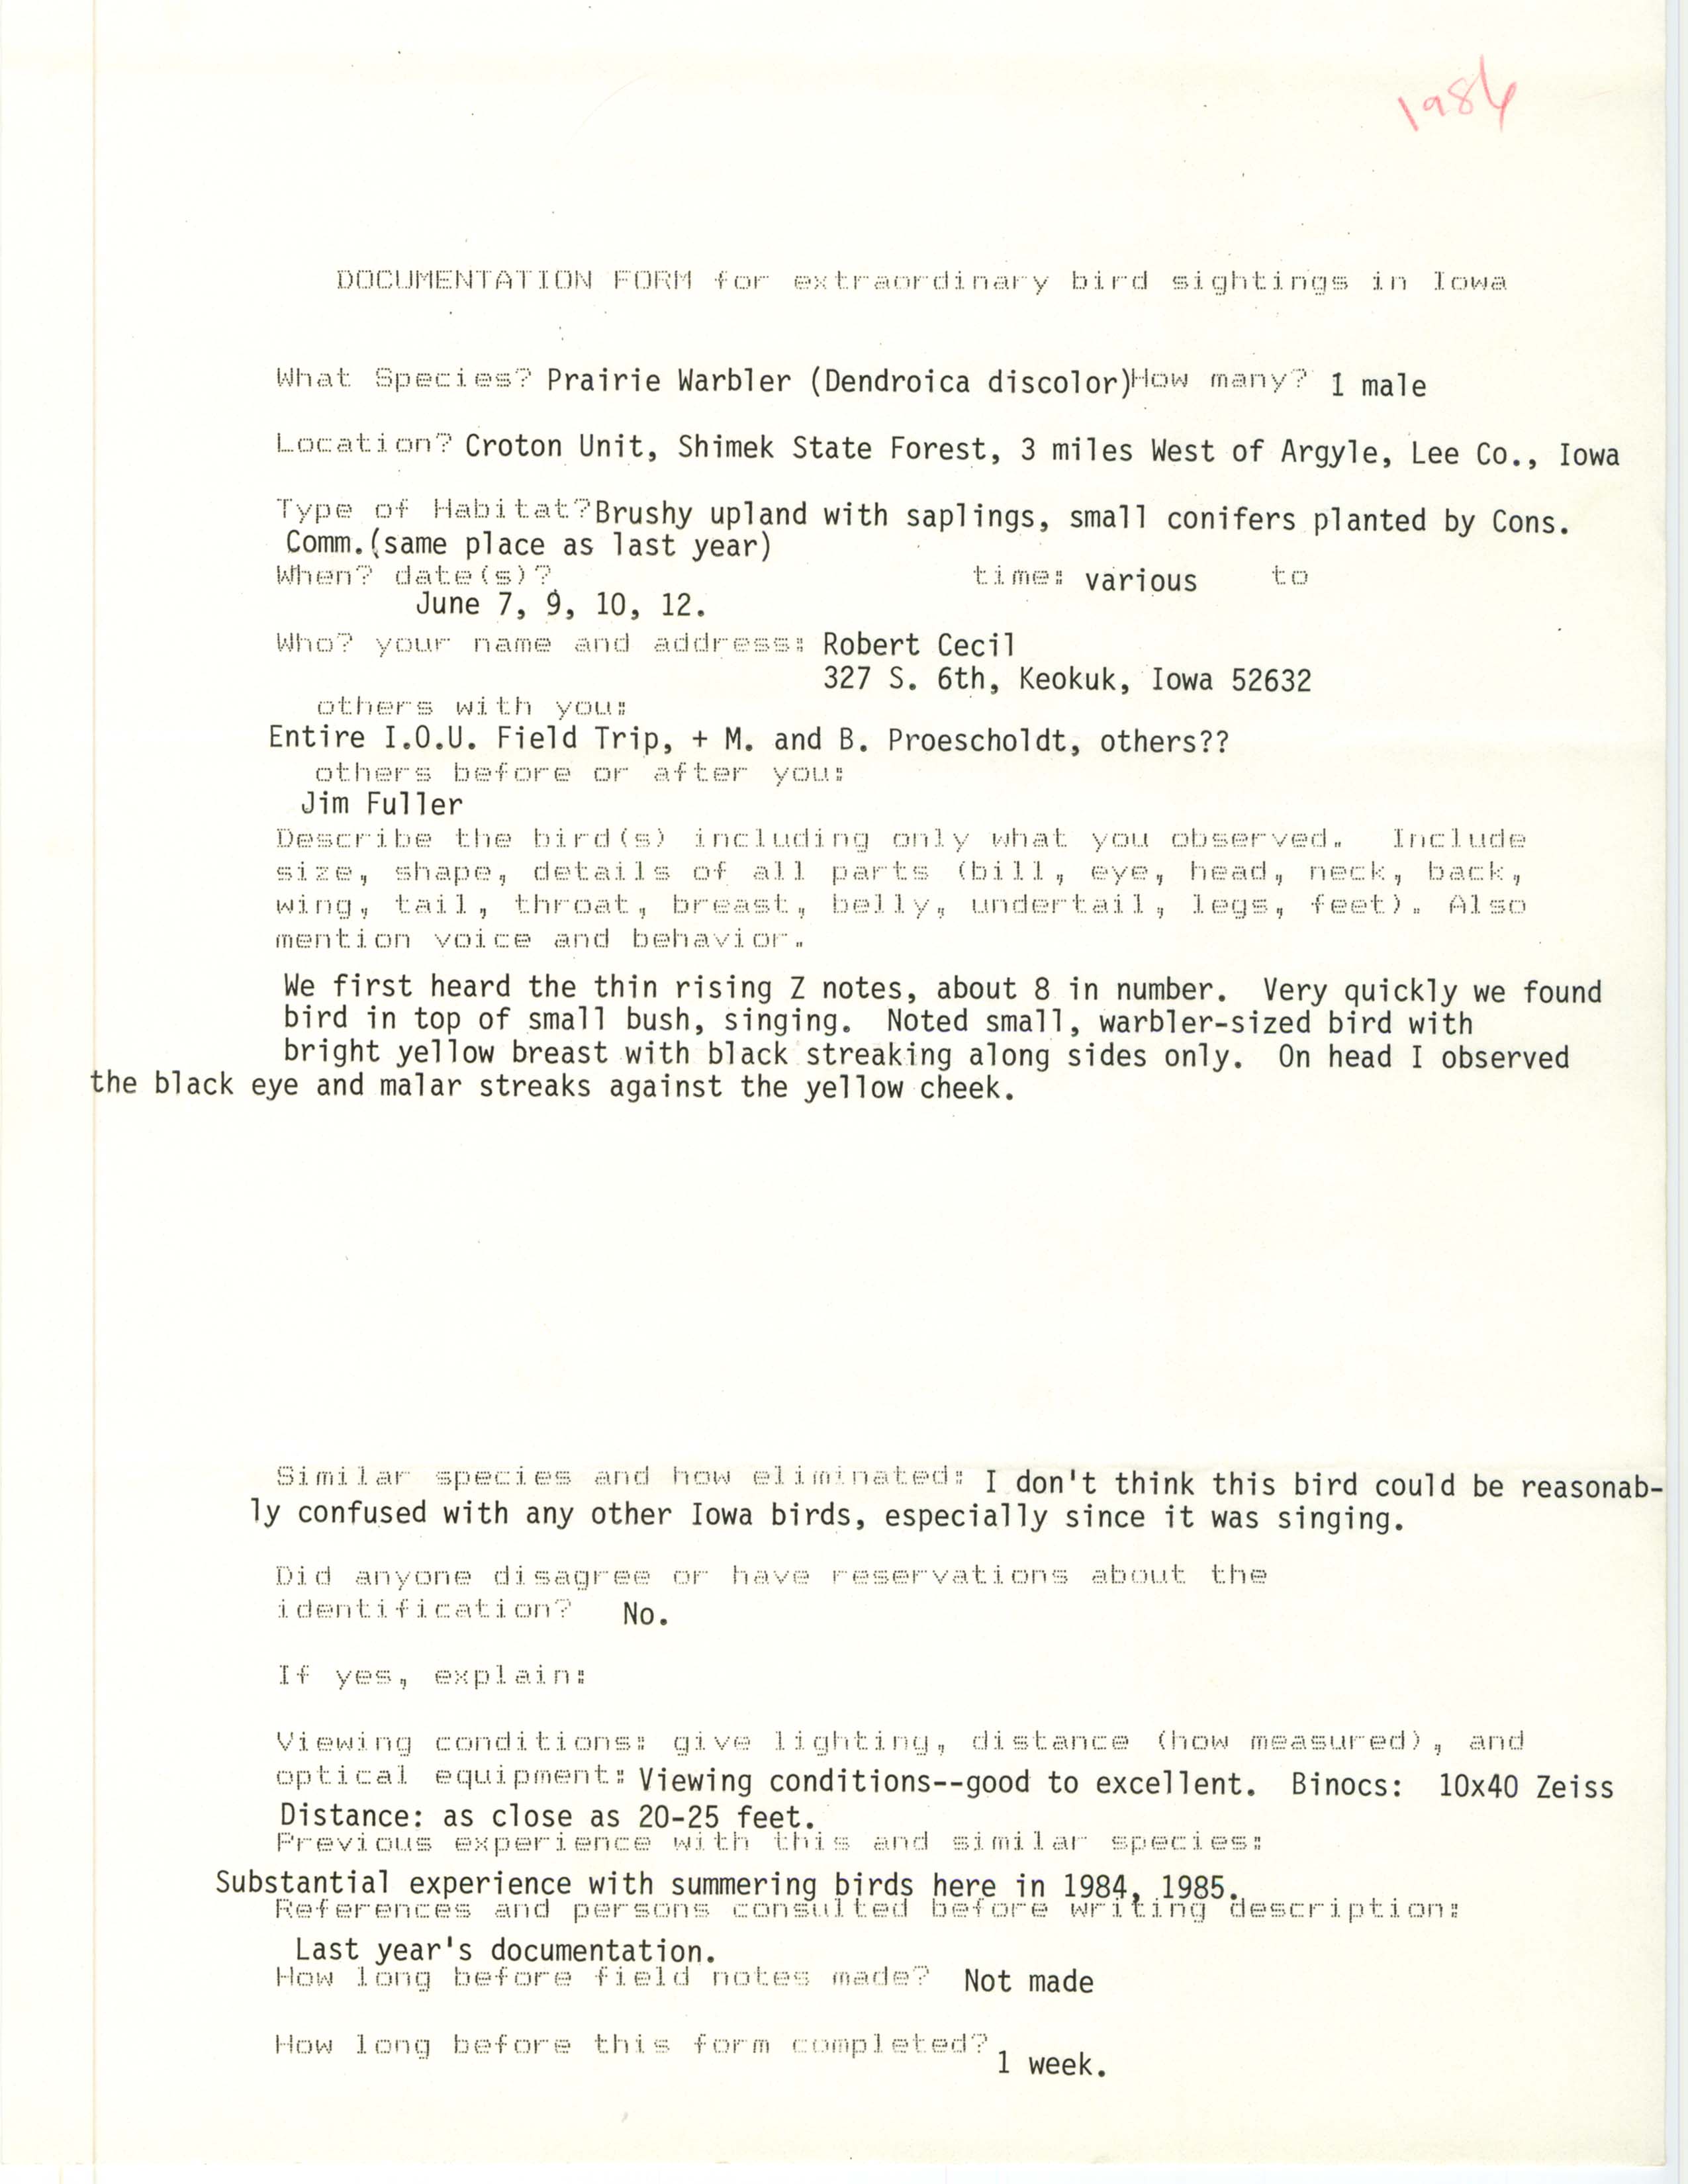 Rare bird documentation form for Prairie Warbler at Croton Unit in Shimek State Forest in 1986